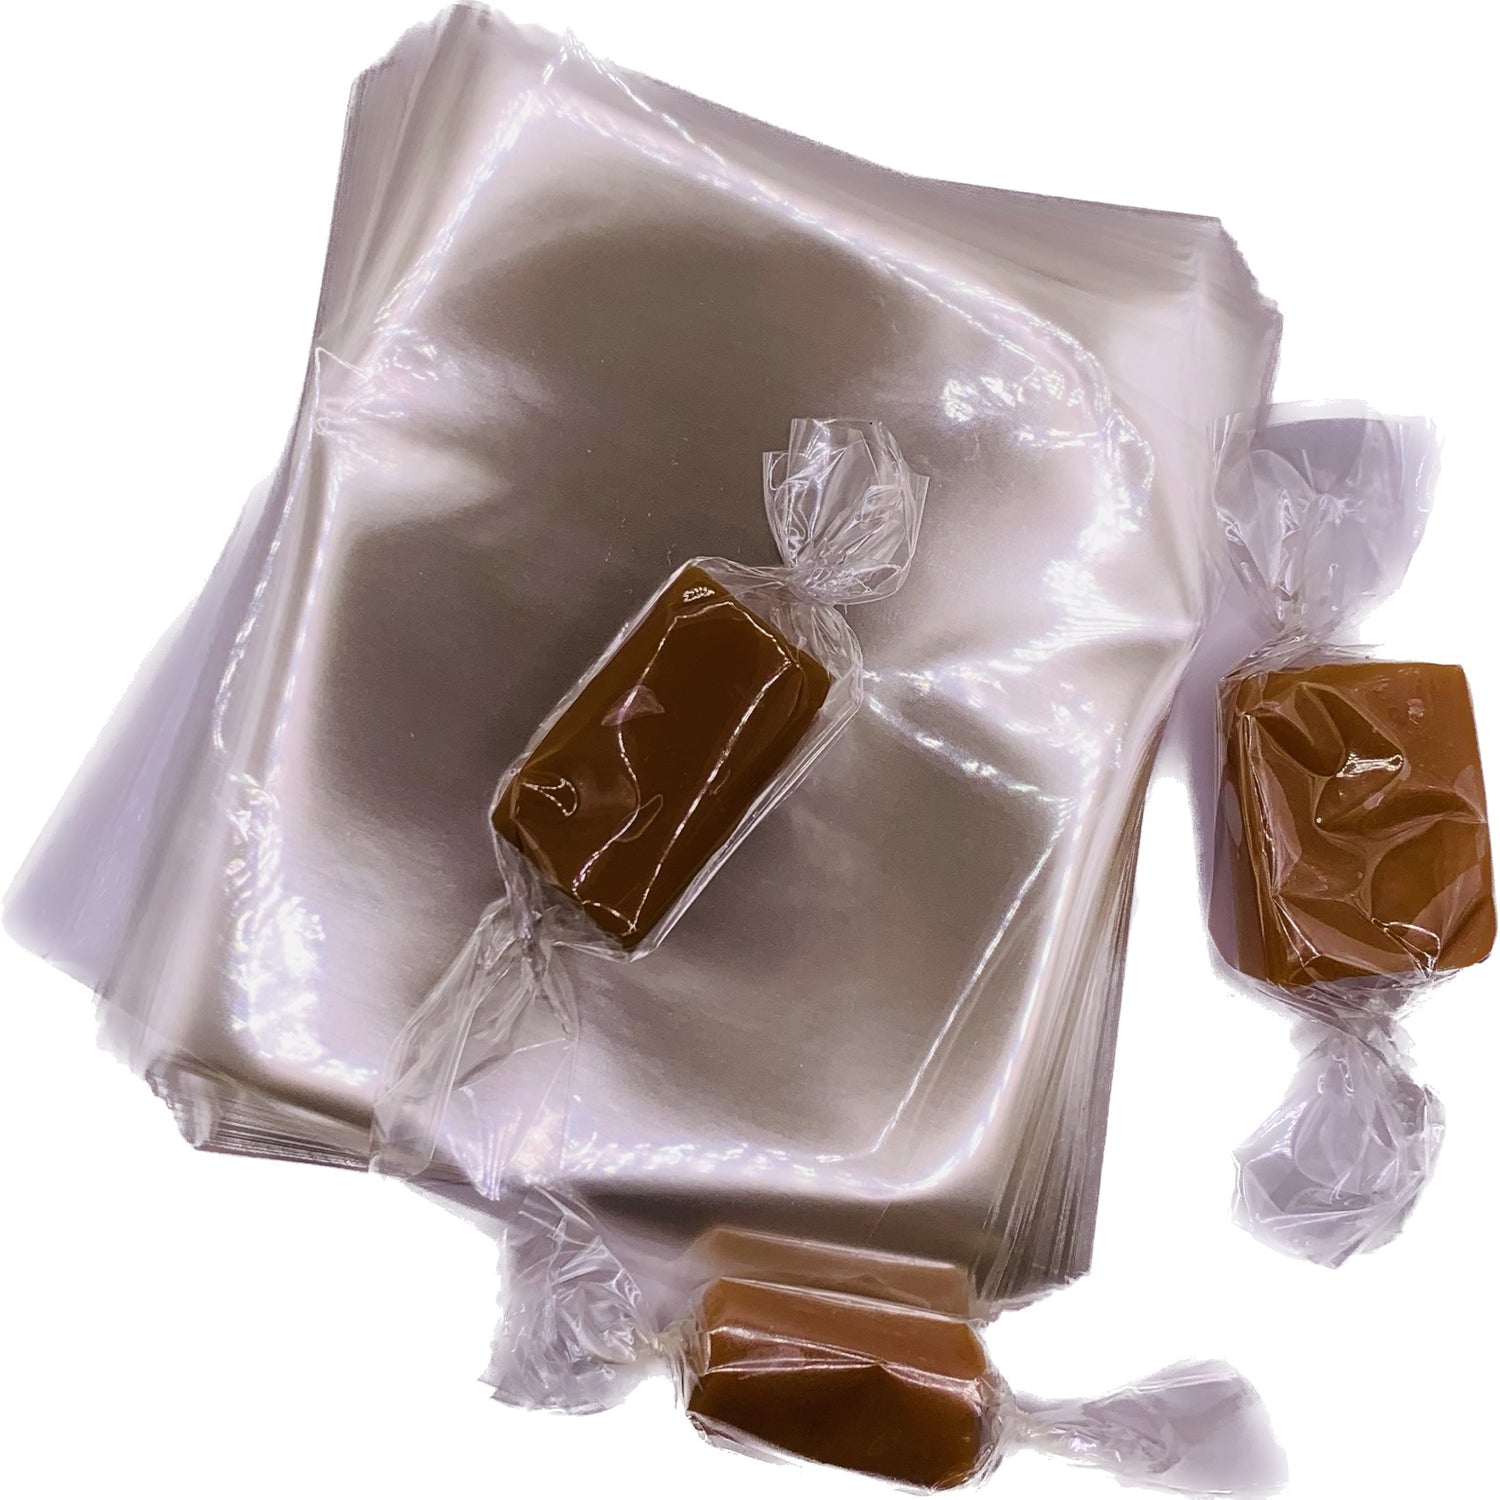 Cellophane Caramel Candy Wrappers with 3 Pieces of Candy